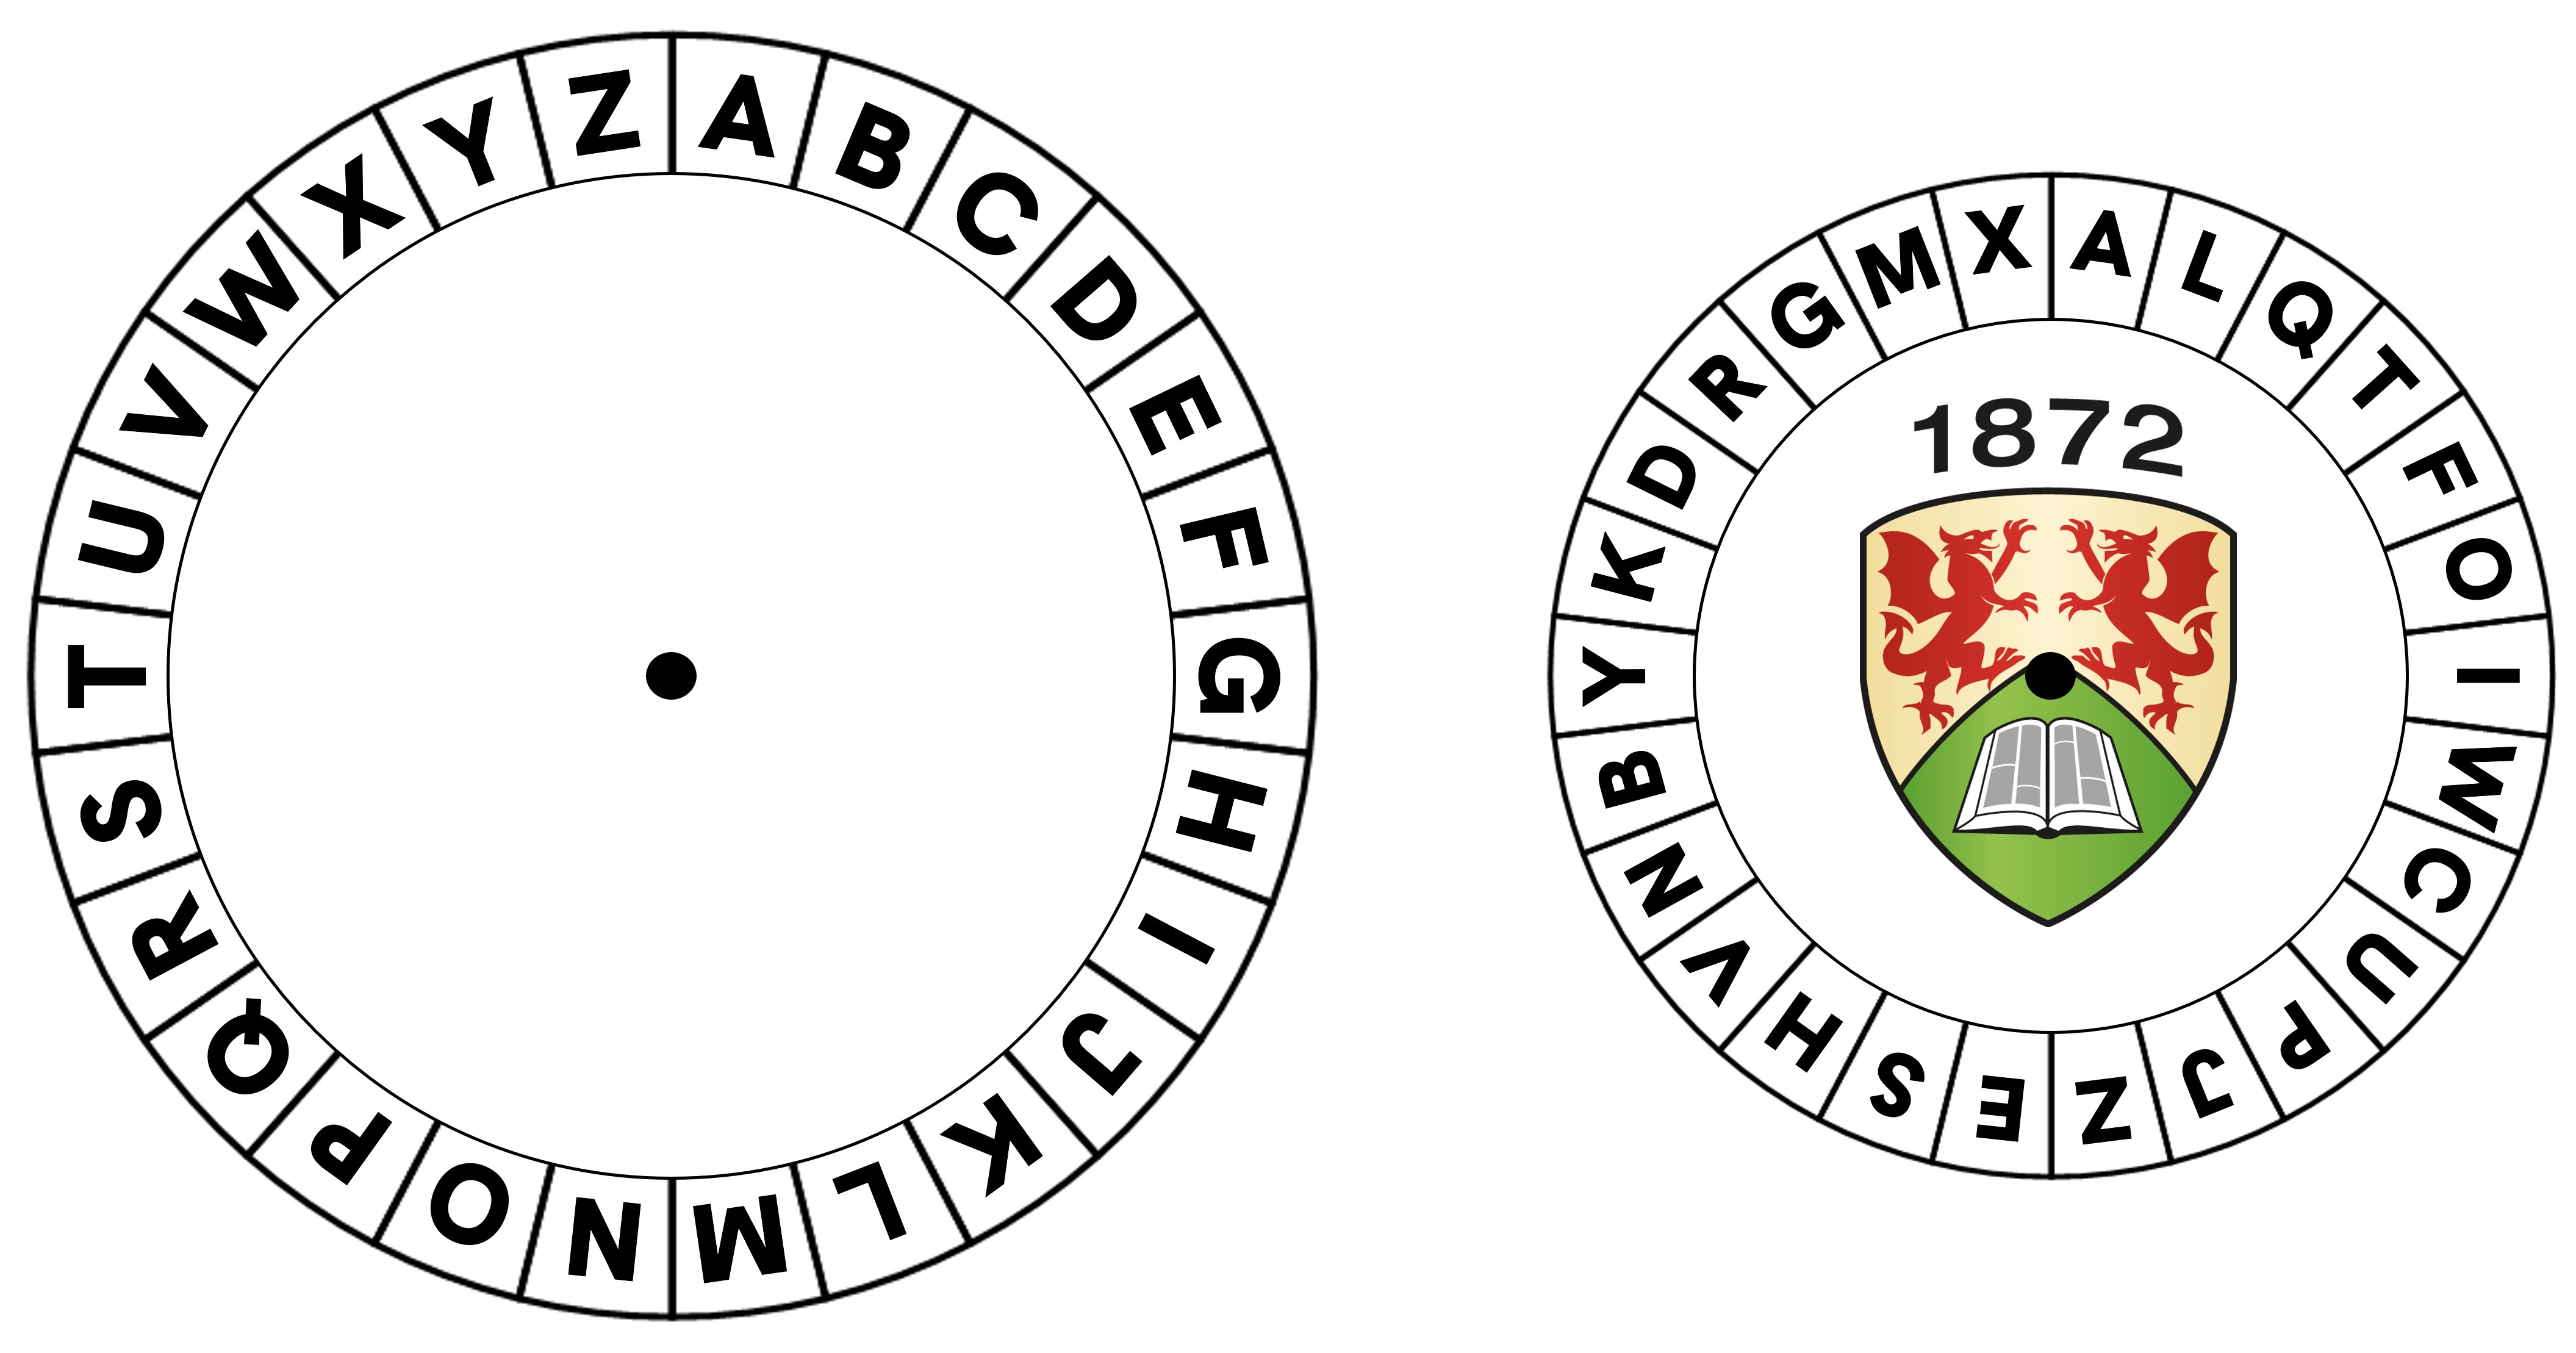 Decoder wheel. The outer ring shows the alphabet from A-Z. The inner ring shows each letter of the alphabet in a scrambled order of: A, L, Q, T, F, O, I, W, C, U, P, J, Z, E, S, H, V, N, B, Y, K, D, R, G, M, X.